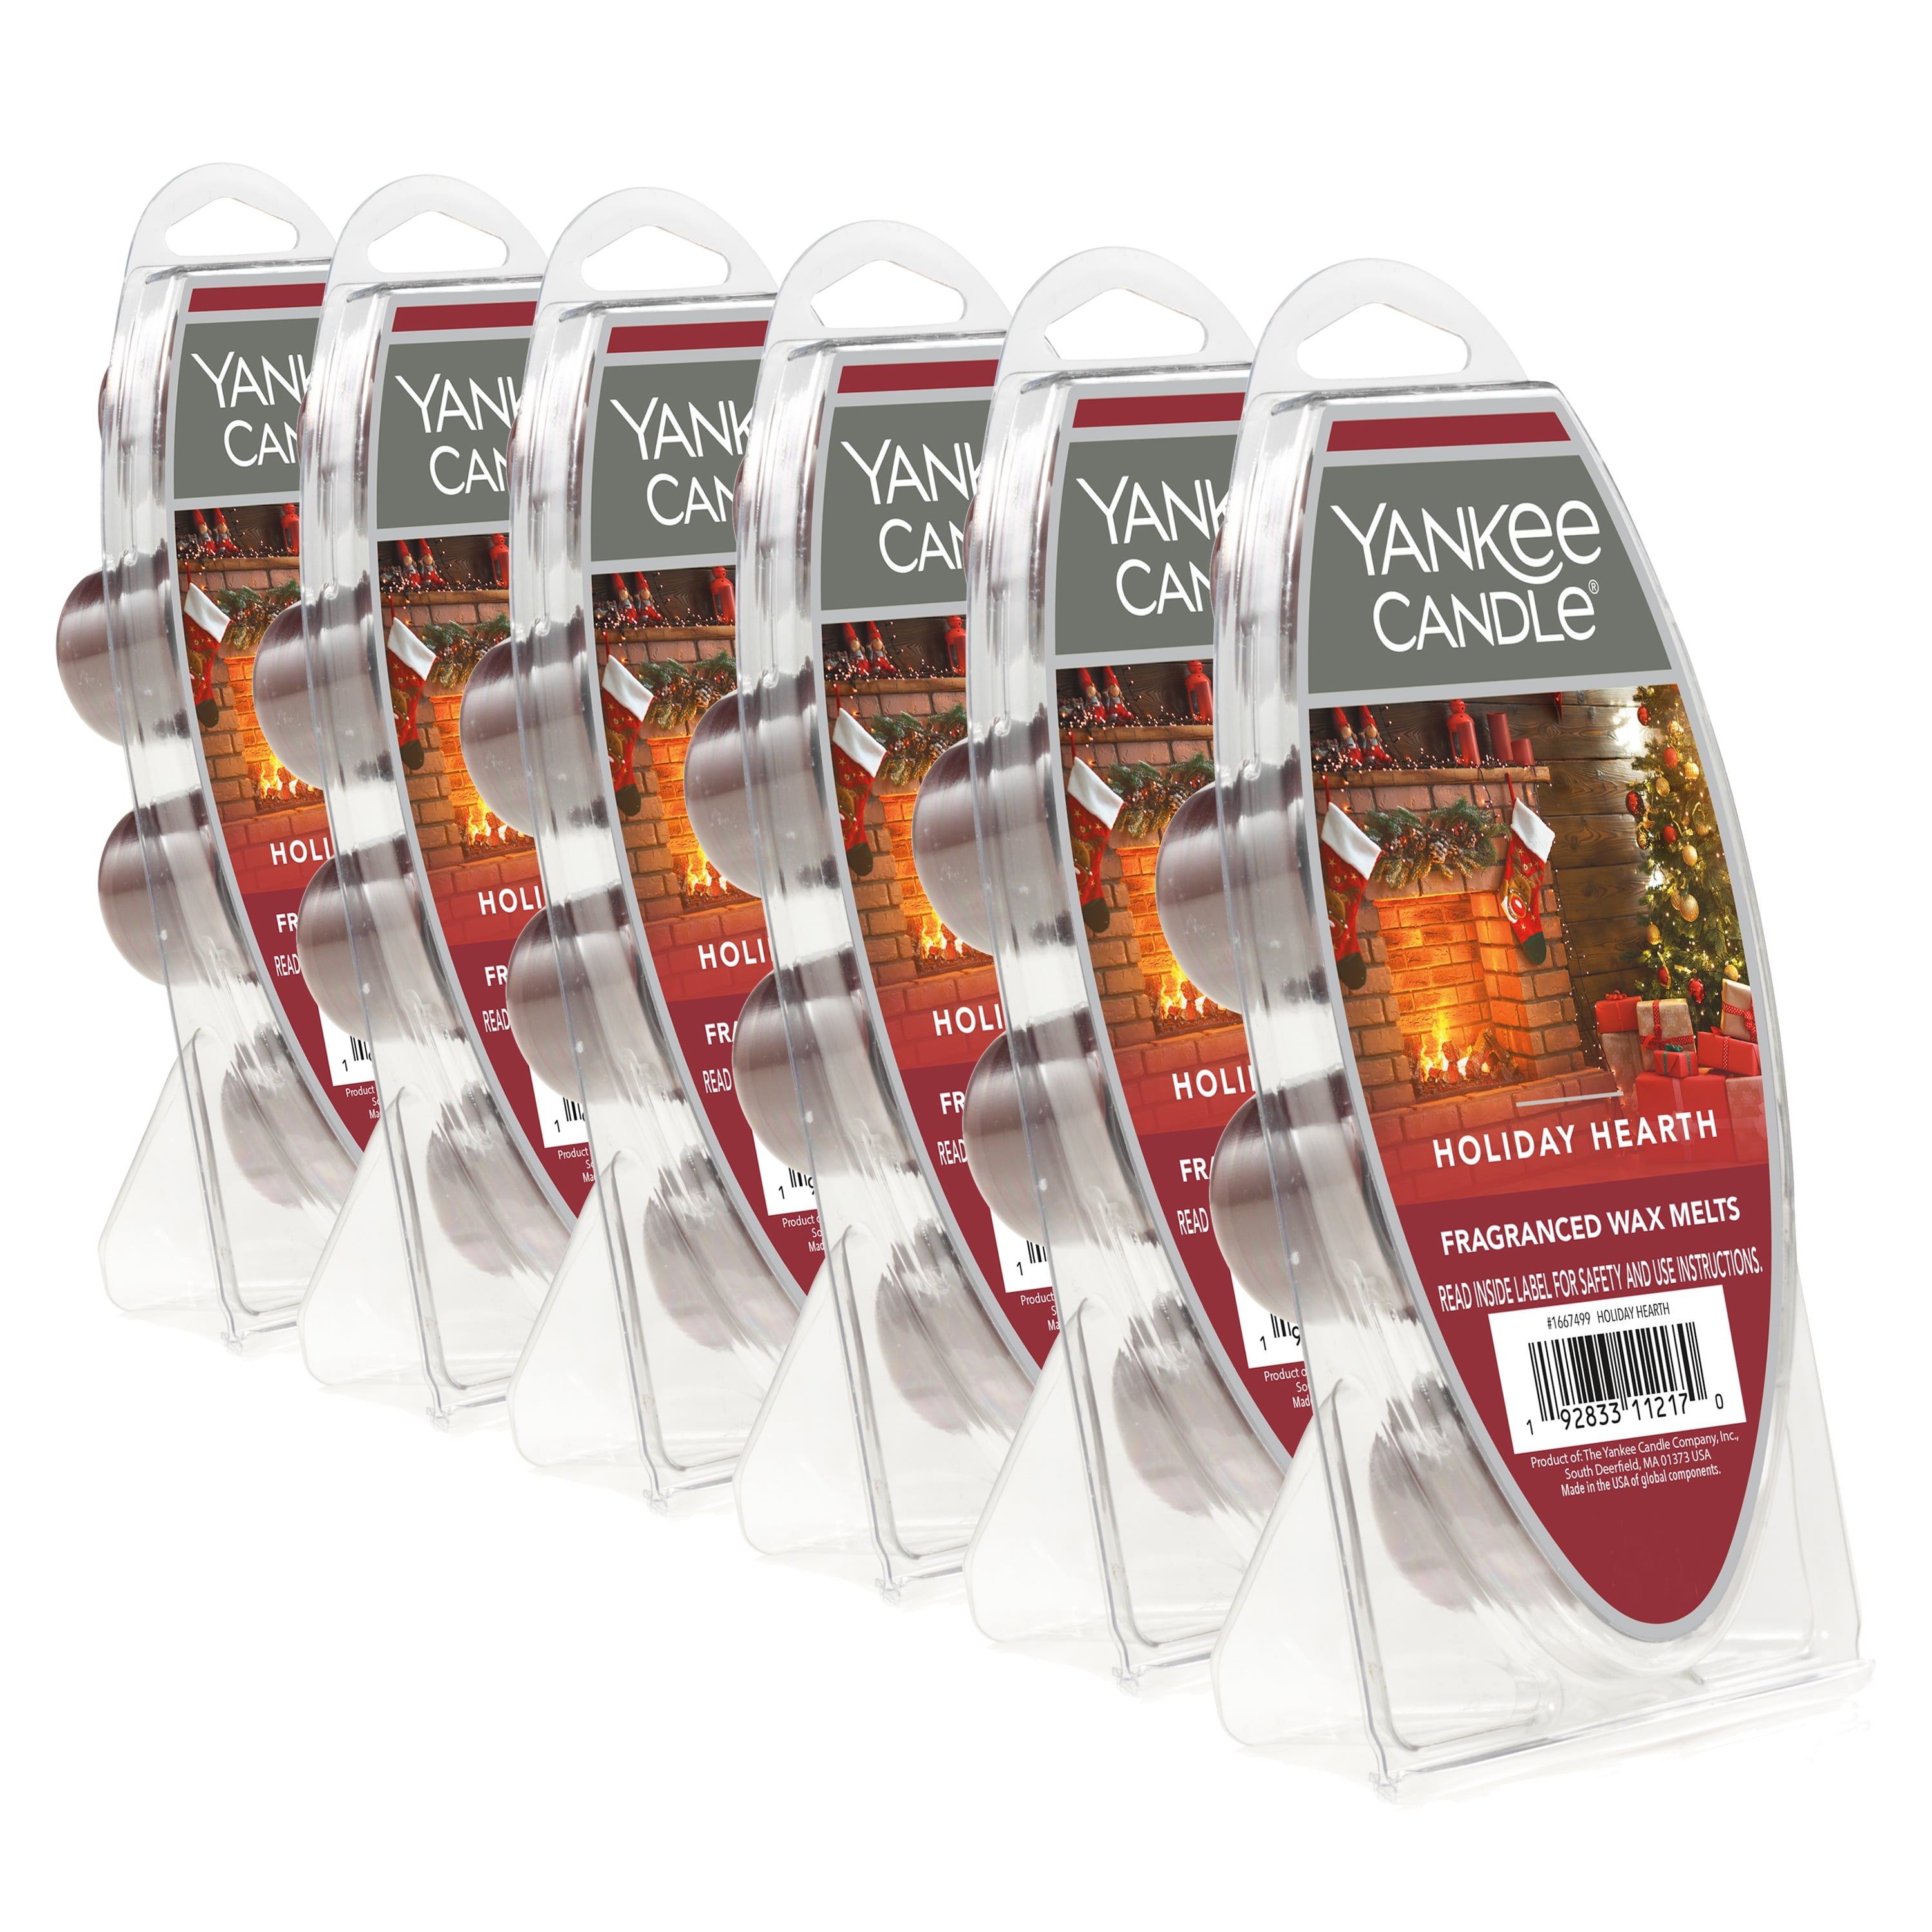 Yankee Candle Wax Melt 6 Pack - Kitchen Spice 